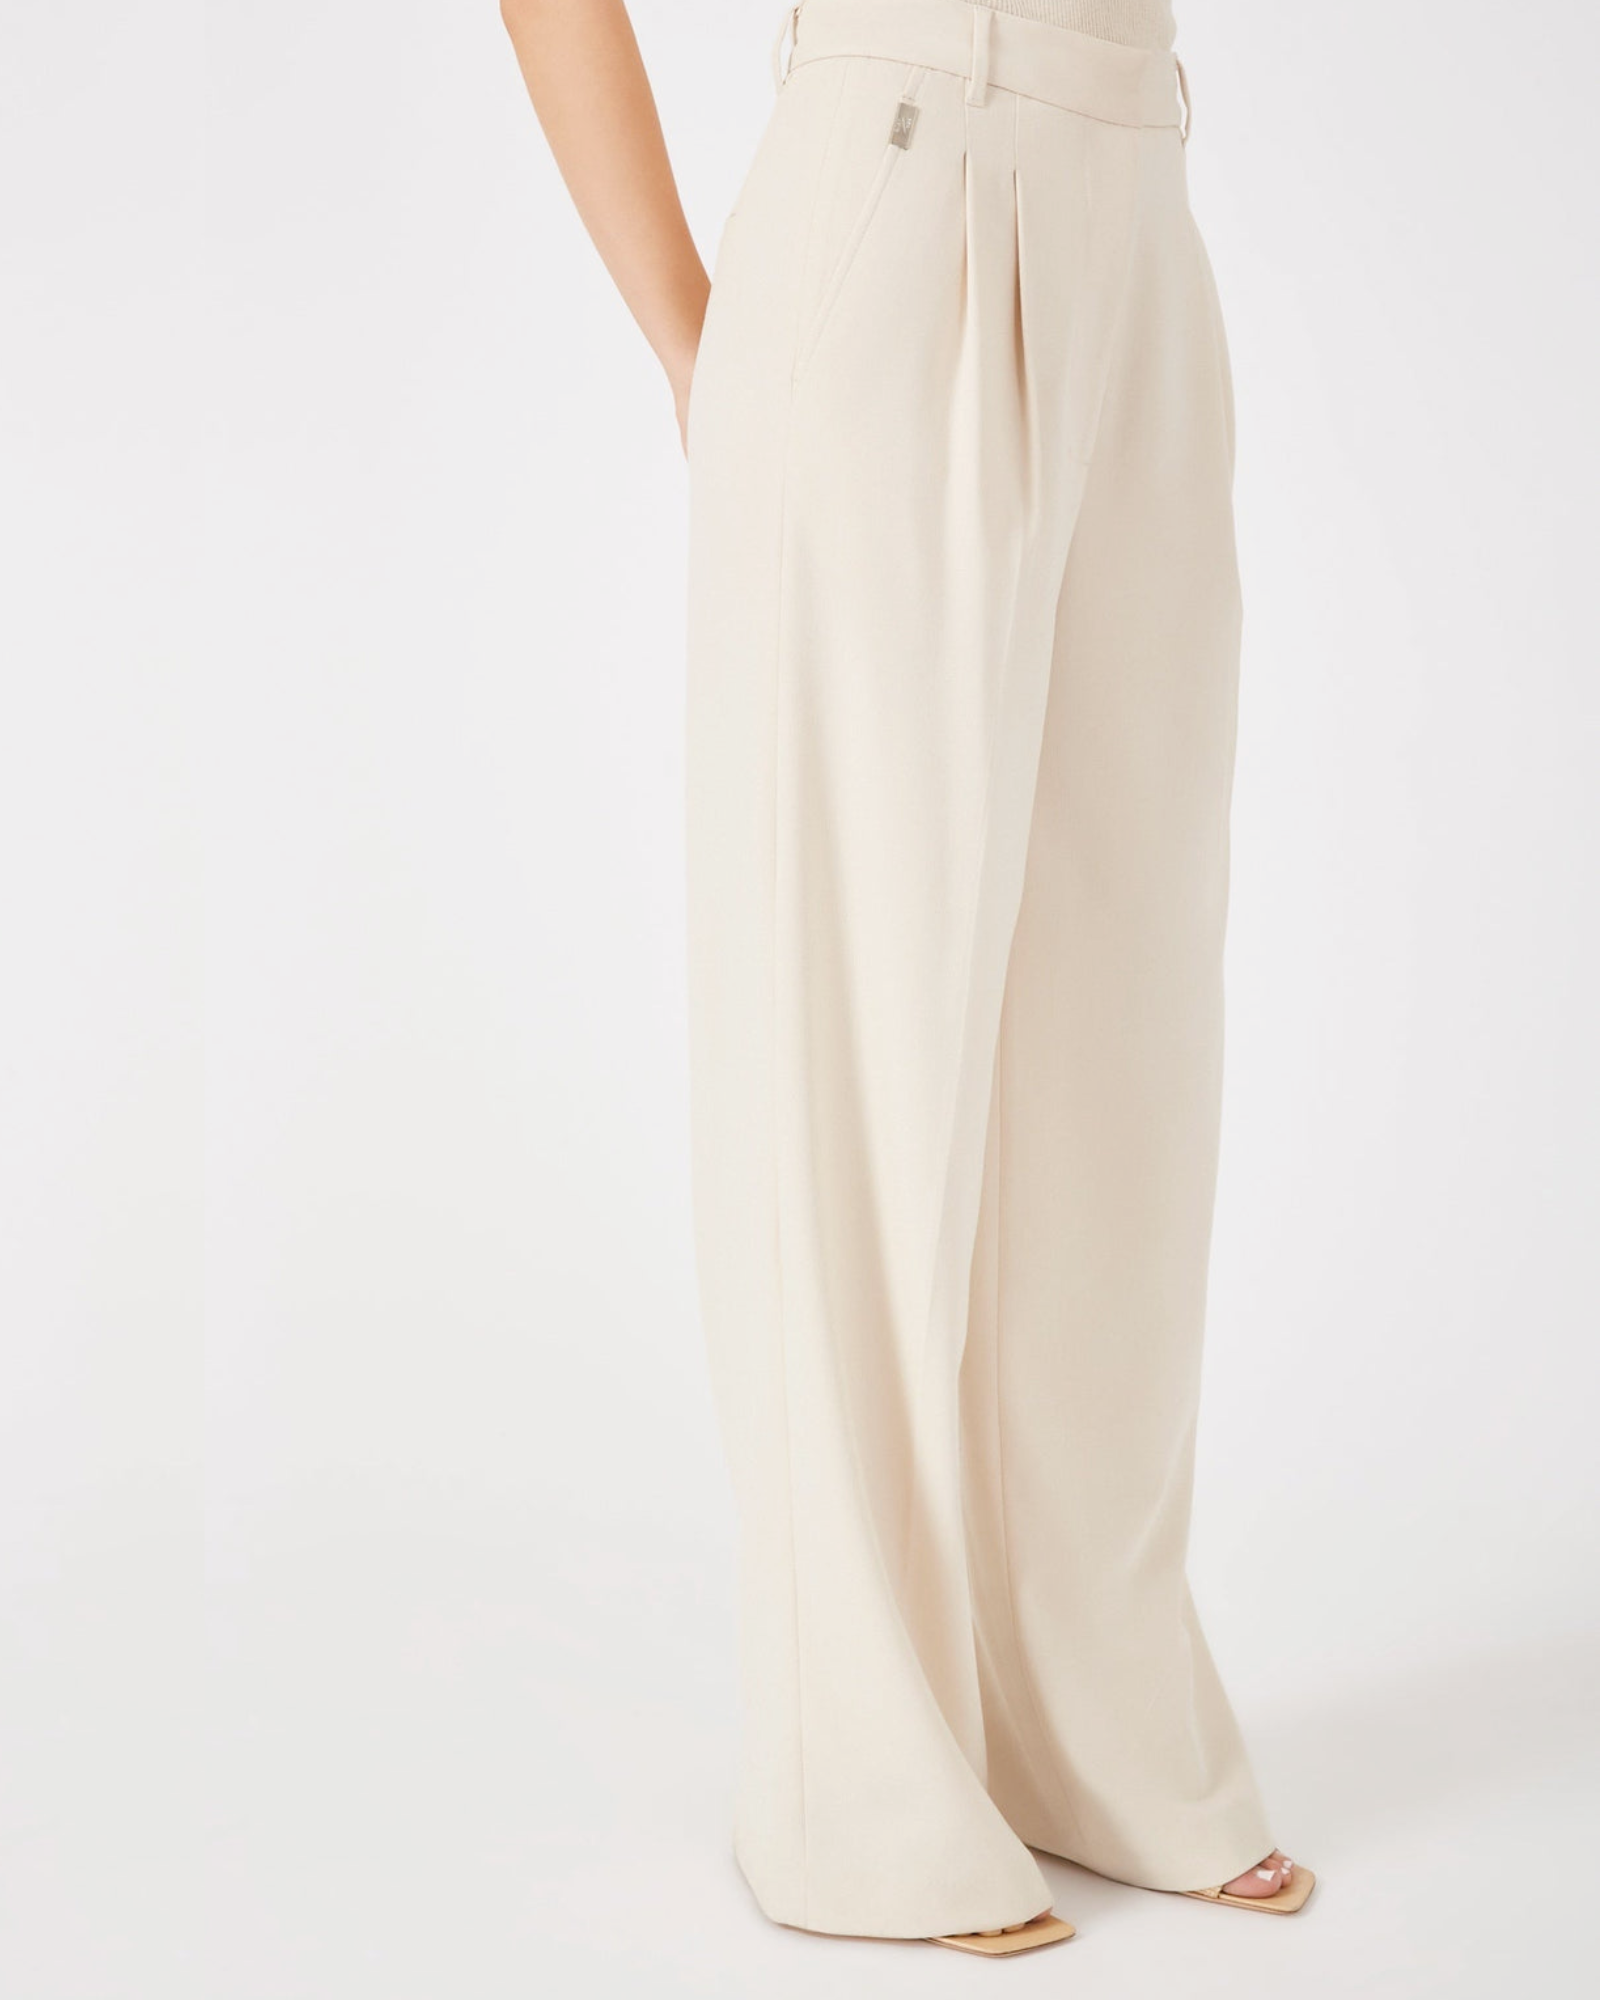 Grey/Ven The Maccaden Pleated Pant in Natural